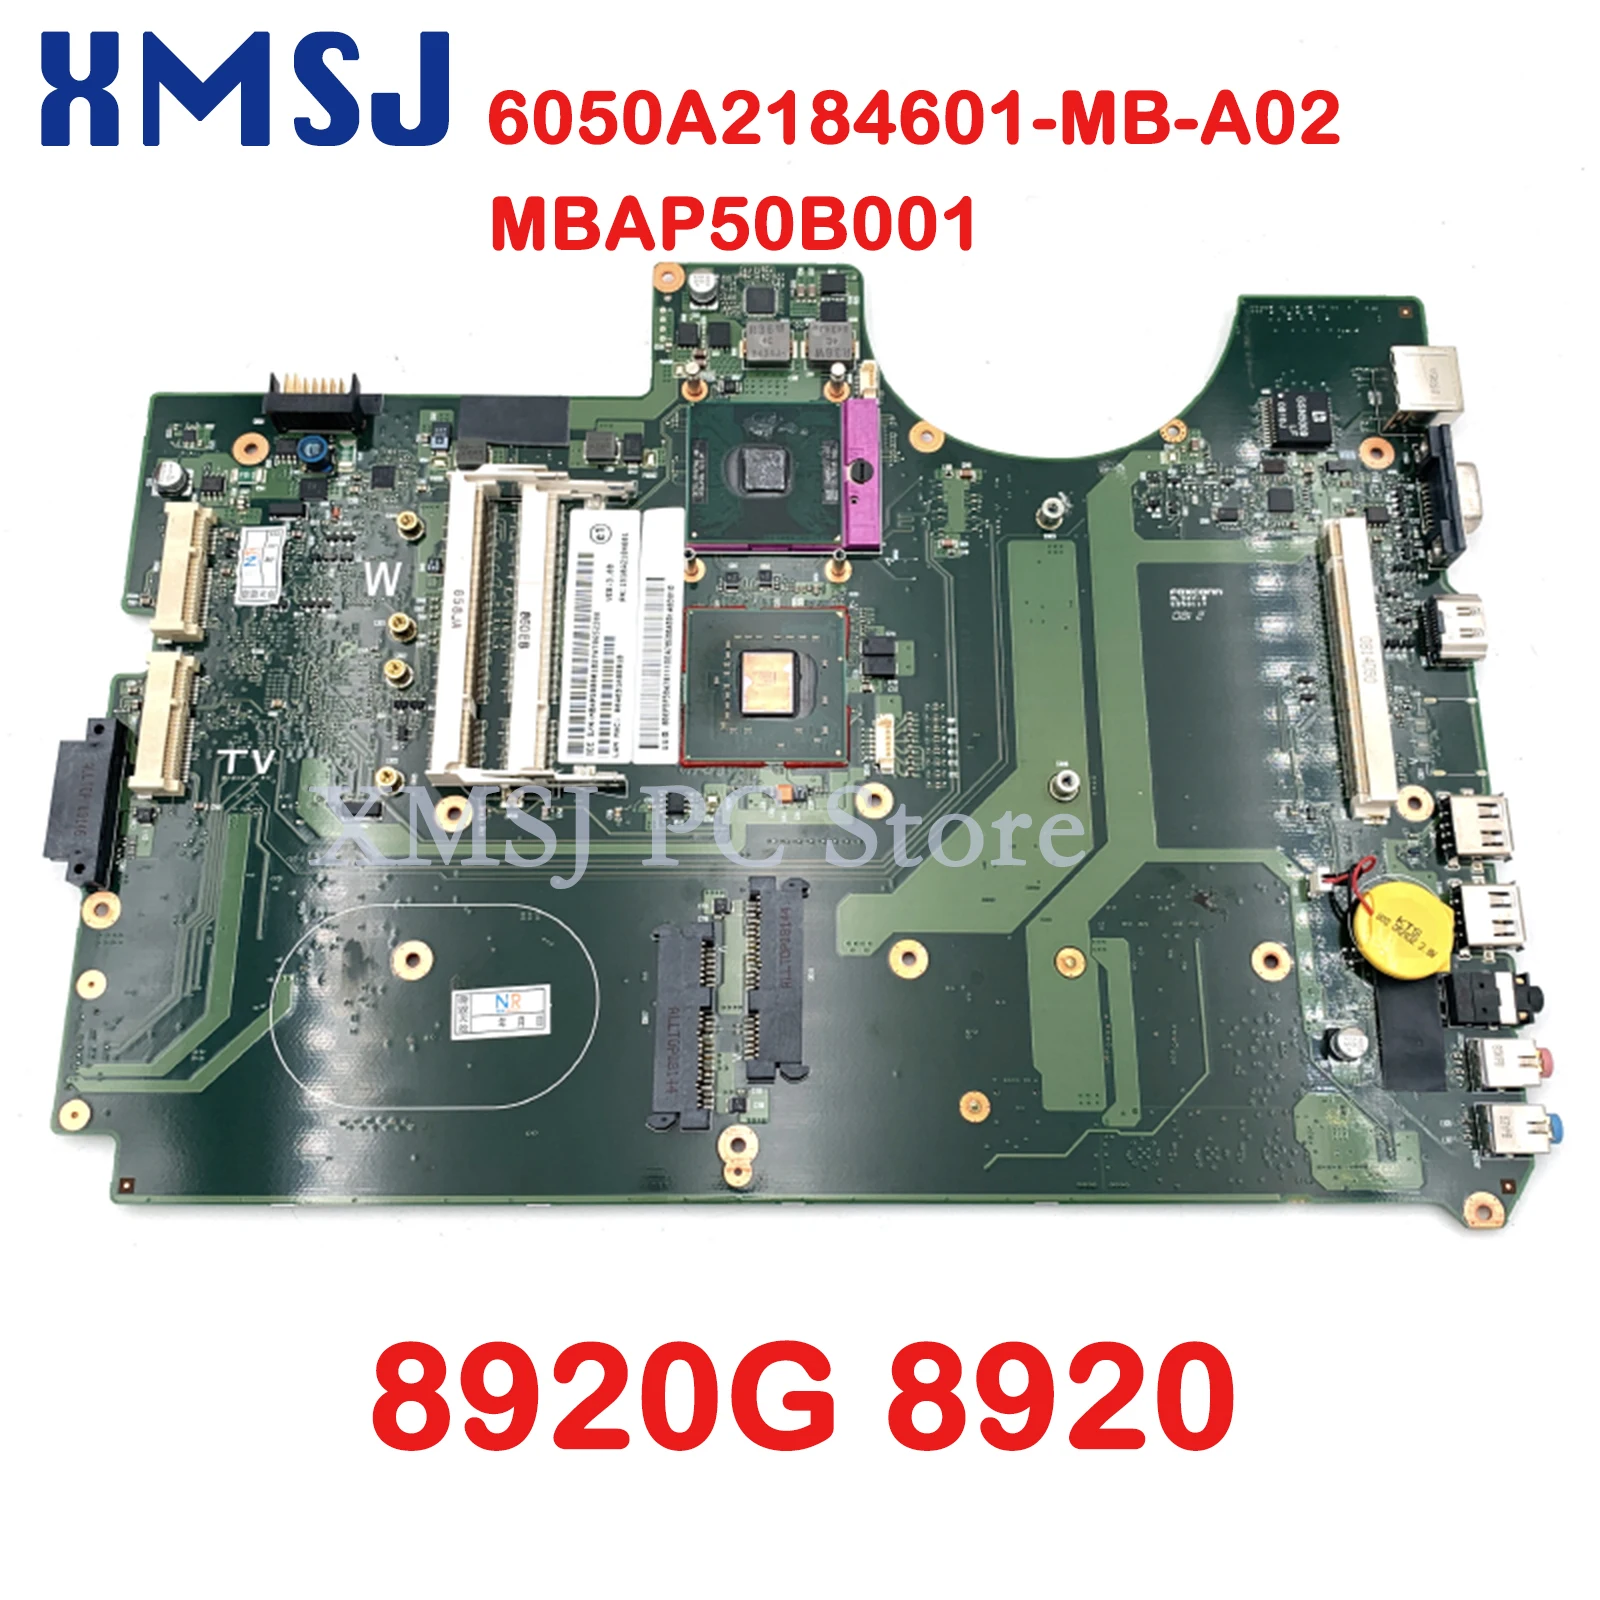 

XMSJ For Acer Apire 8920G 8920 Laptop Motherboard 6050A2184601-MB-A02 MBAP50B001 DDR2 Free CPU MAIN BOARD Fully Tested